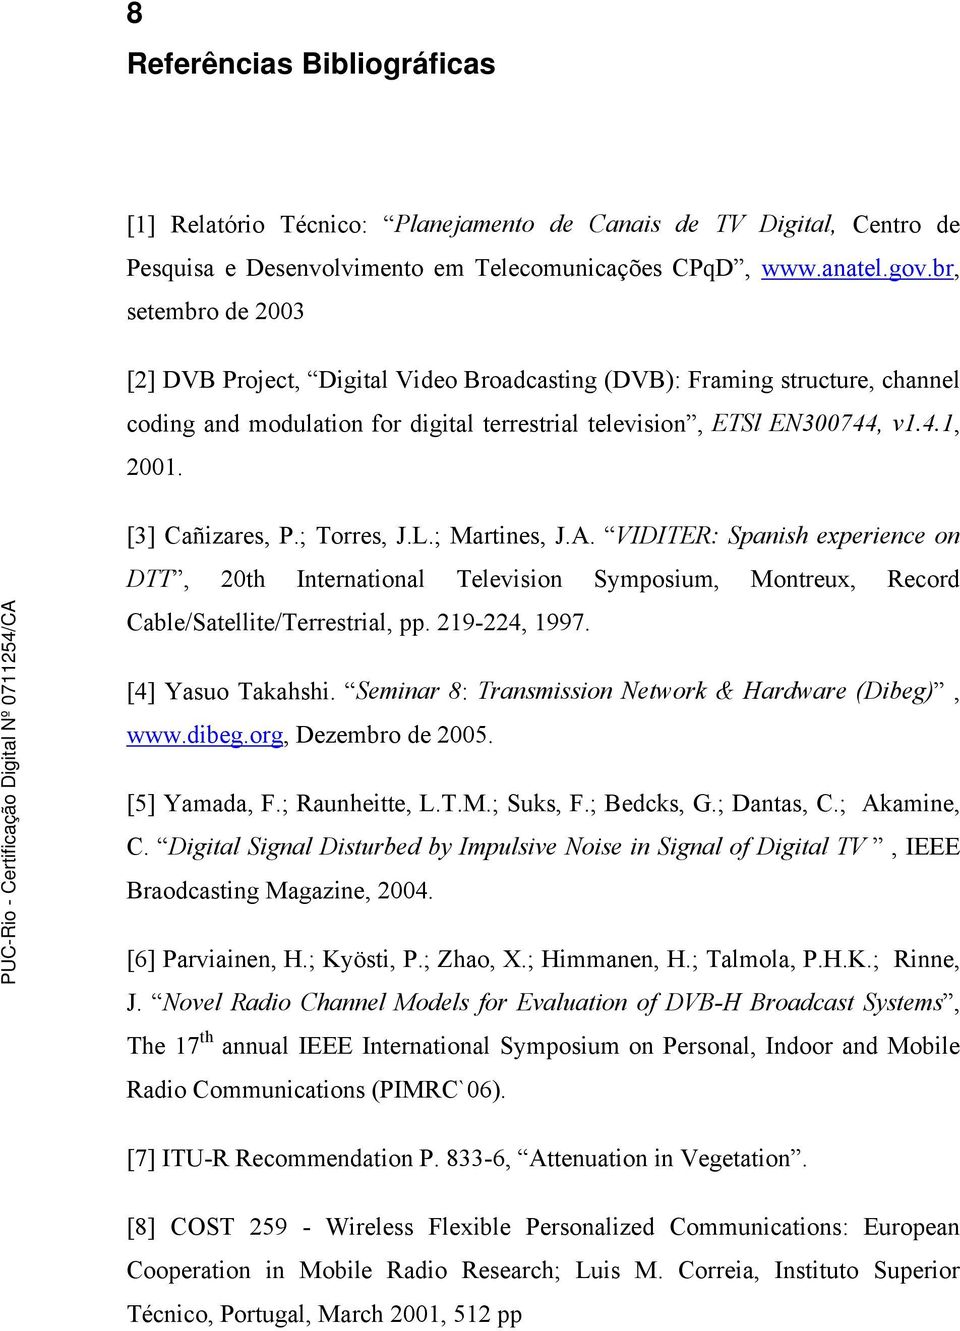 [3] Cañizares, P.; Torres, J.L.; Martines, J.A. VIDITER: Spanish experience on DTT, 20th International Television Symposium, Montreux, Record Cable/Satellite/Terrestrial, pp. 219-224, 1997.